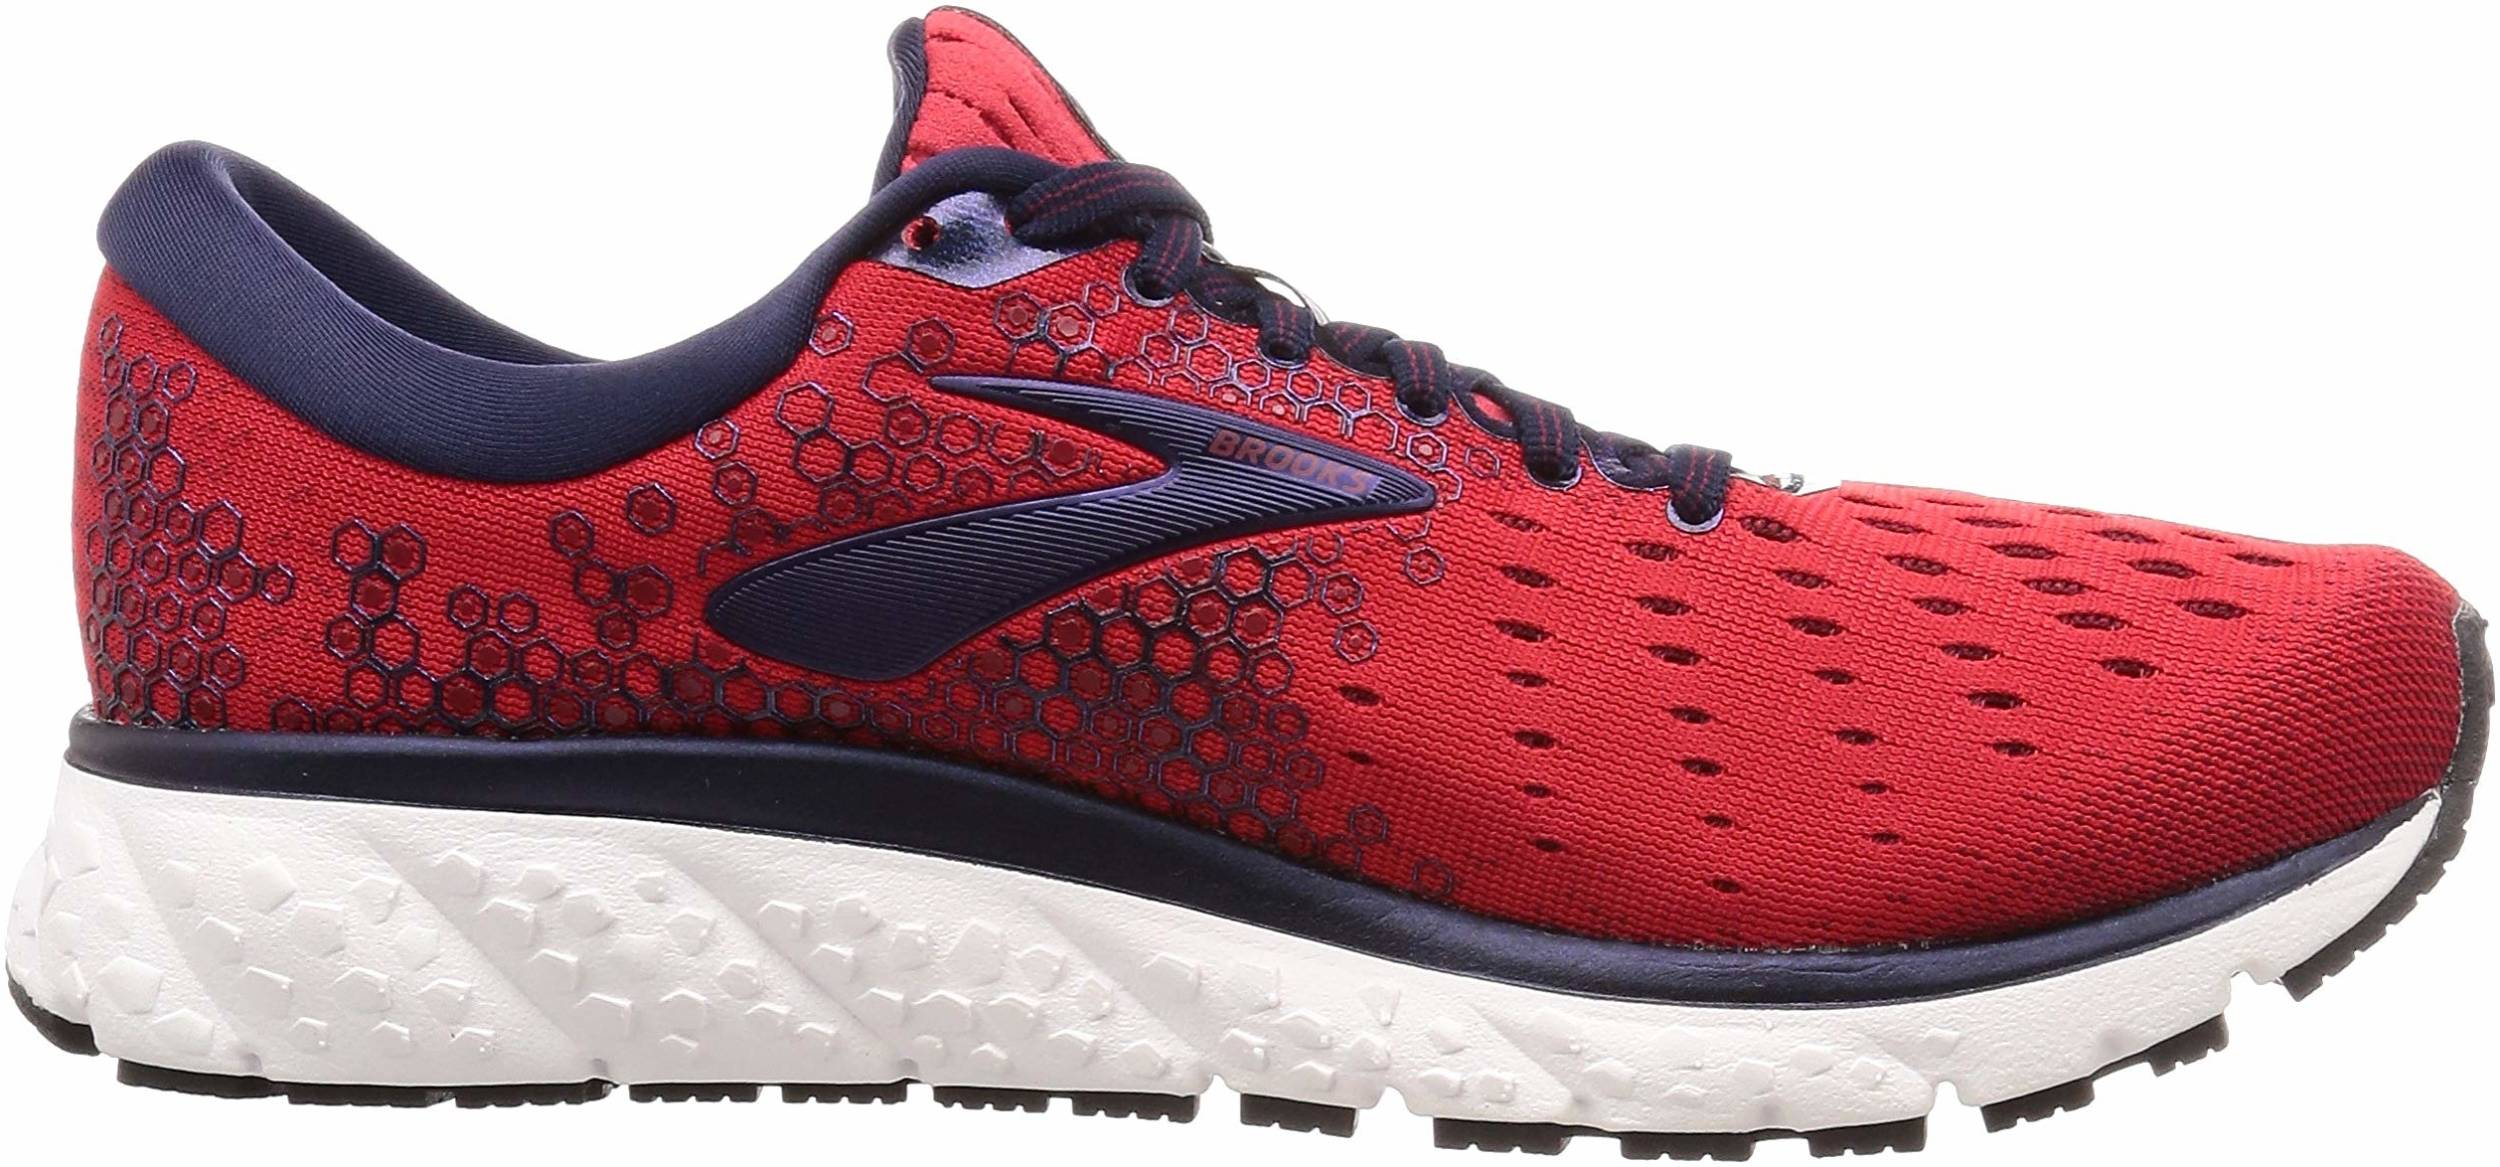 brooks ghost red